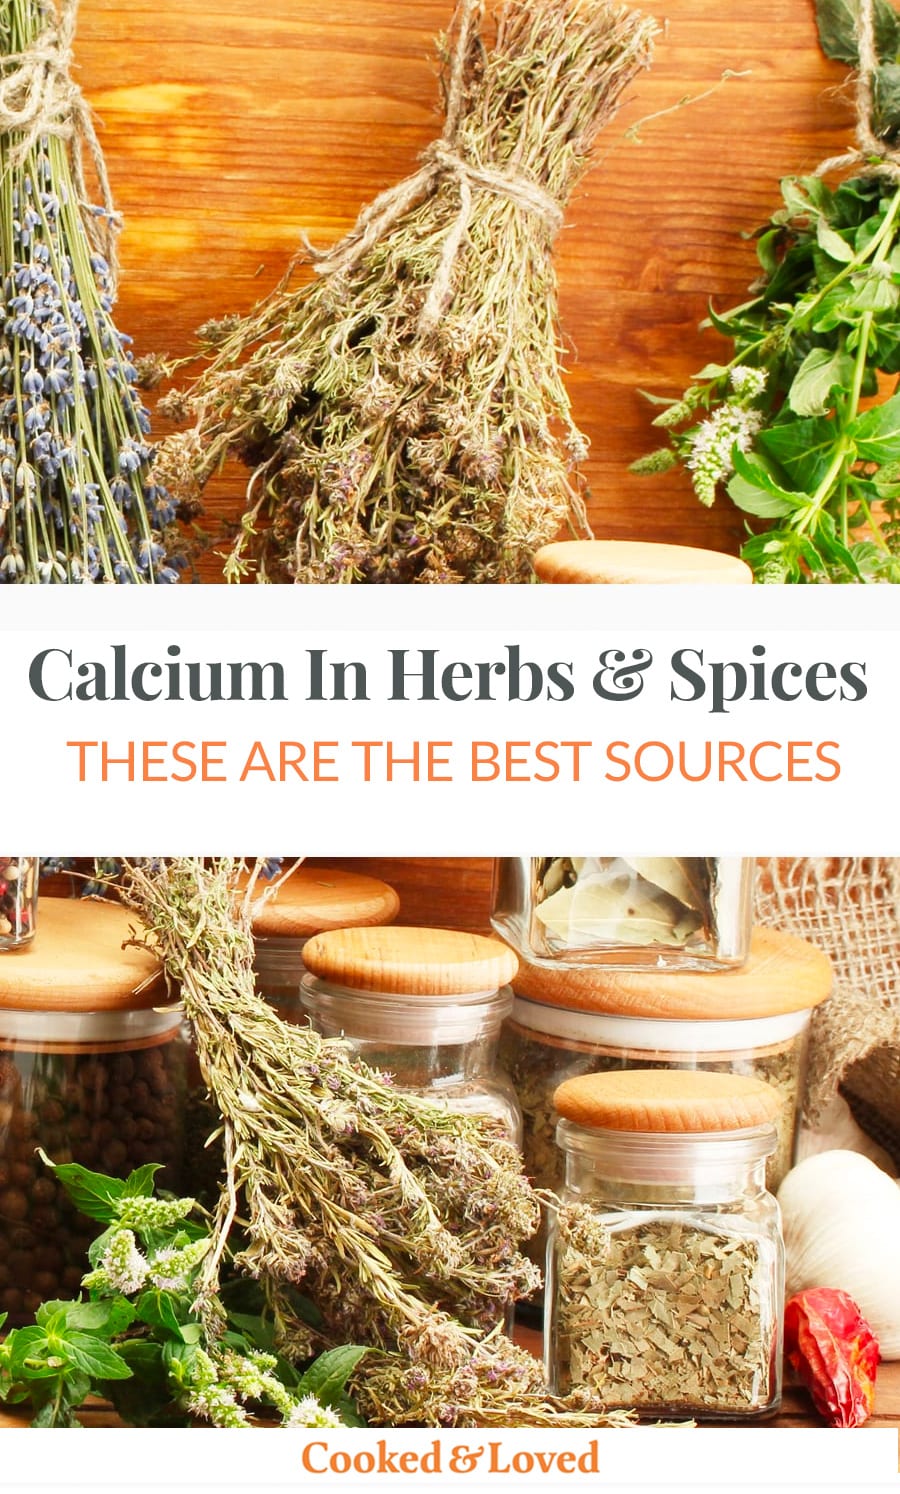 Calcium In Herbs & Spices: Best Sources